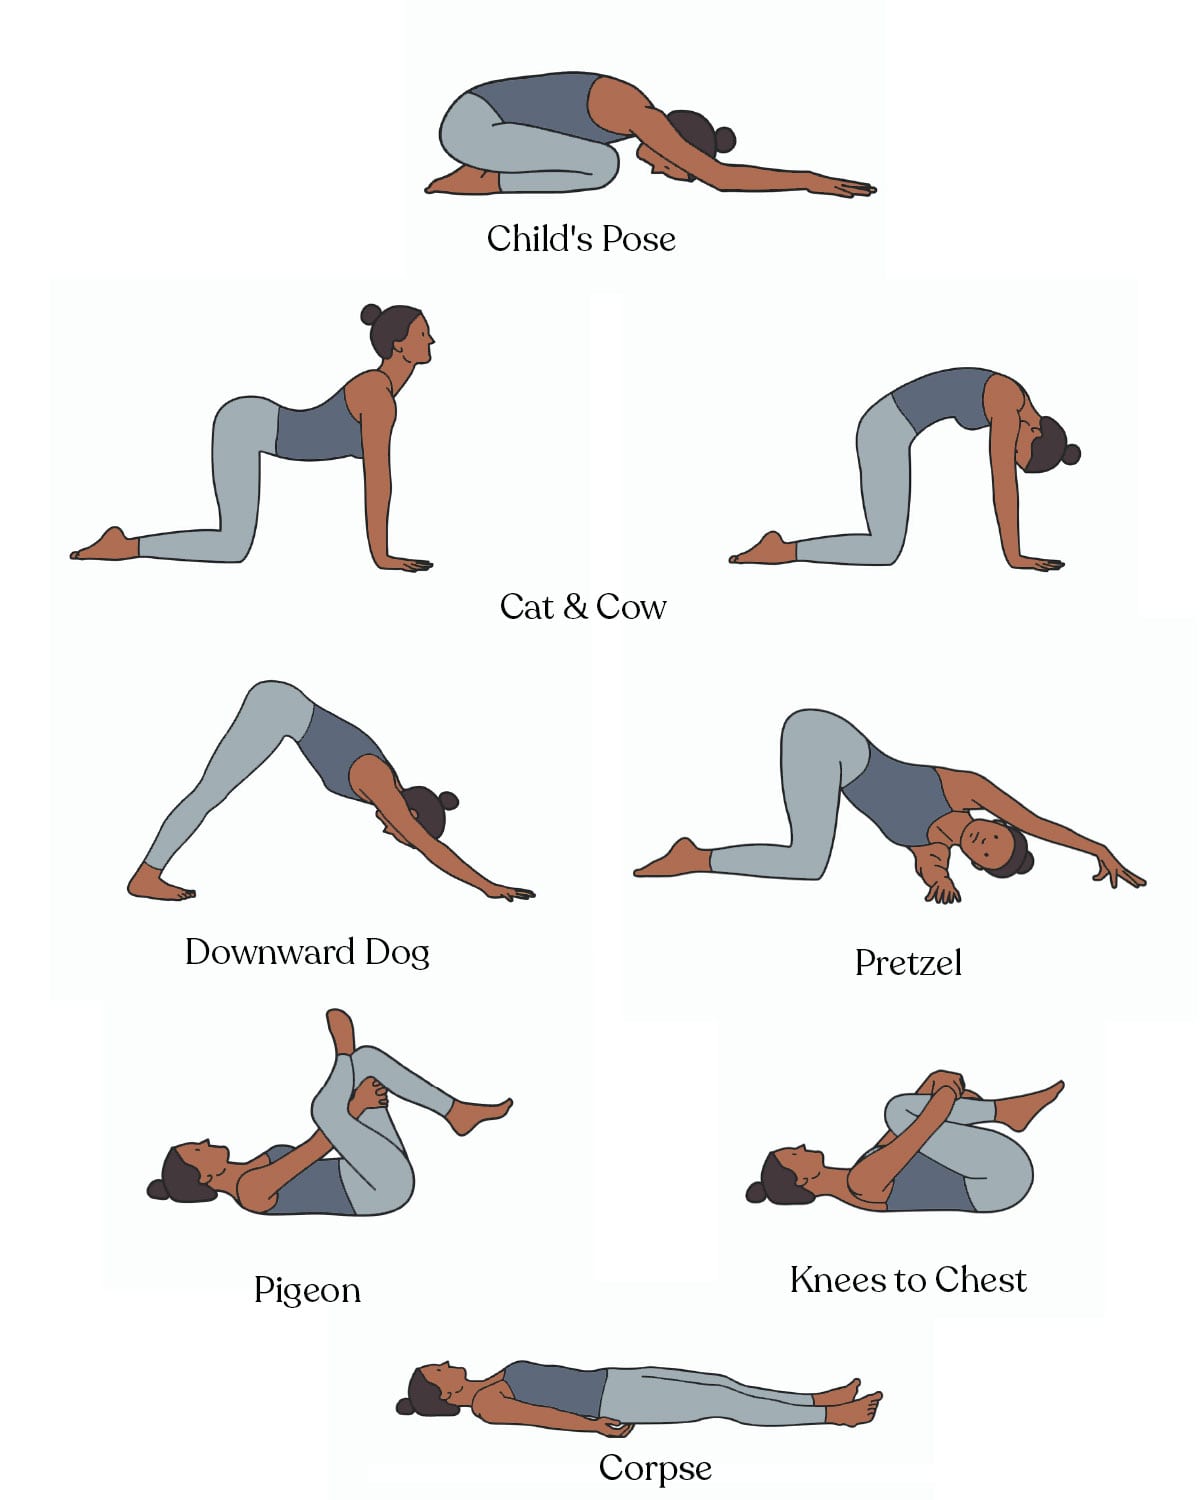 This Yoga Cool Down Stretch Routine Will Loosen Up Your Muscles | SELF